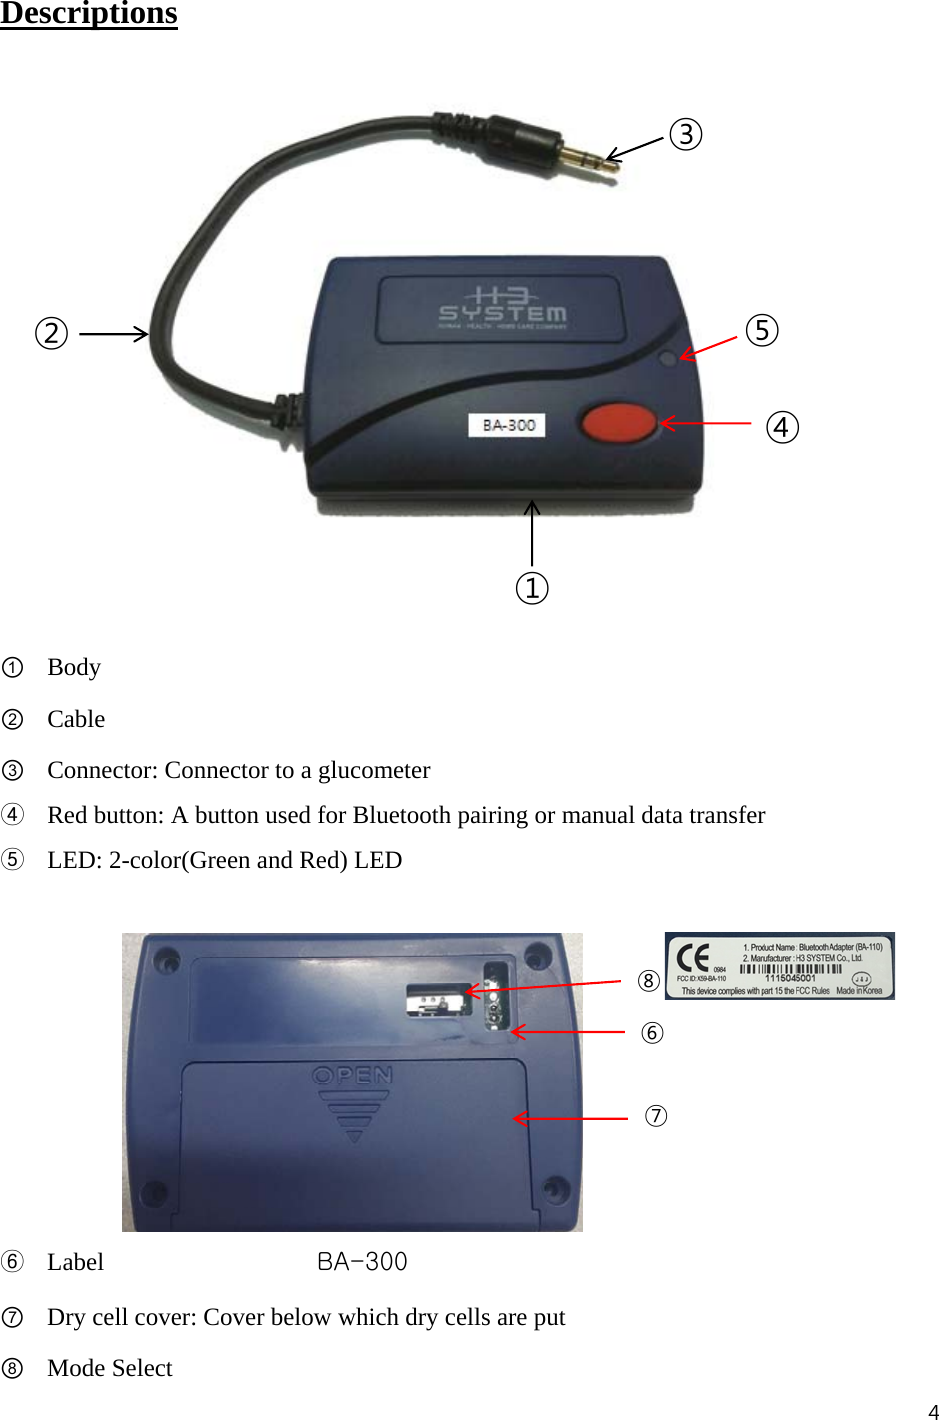 4  Descriptions            ① Body ② Cable ③ Connector: Connector to a glucometer ④ Red button: A button used for Bluetooth pairing or manual data transfer ⑤ LED: 2-color(Green and Red) LED              ⑥ Label                 BA-300 ⑦ Dry cell cover: Cover below which dry cells are put ⑧ Mode Select ⑥⑦①② ④ ⑤ ③⑧